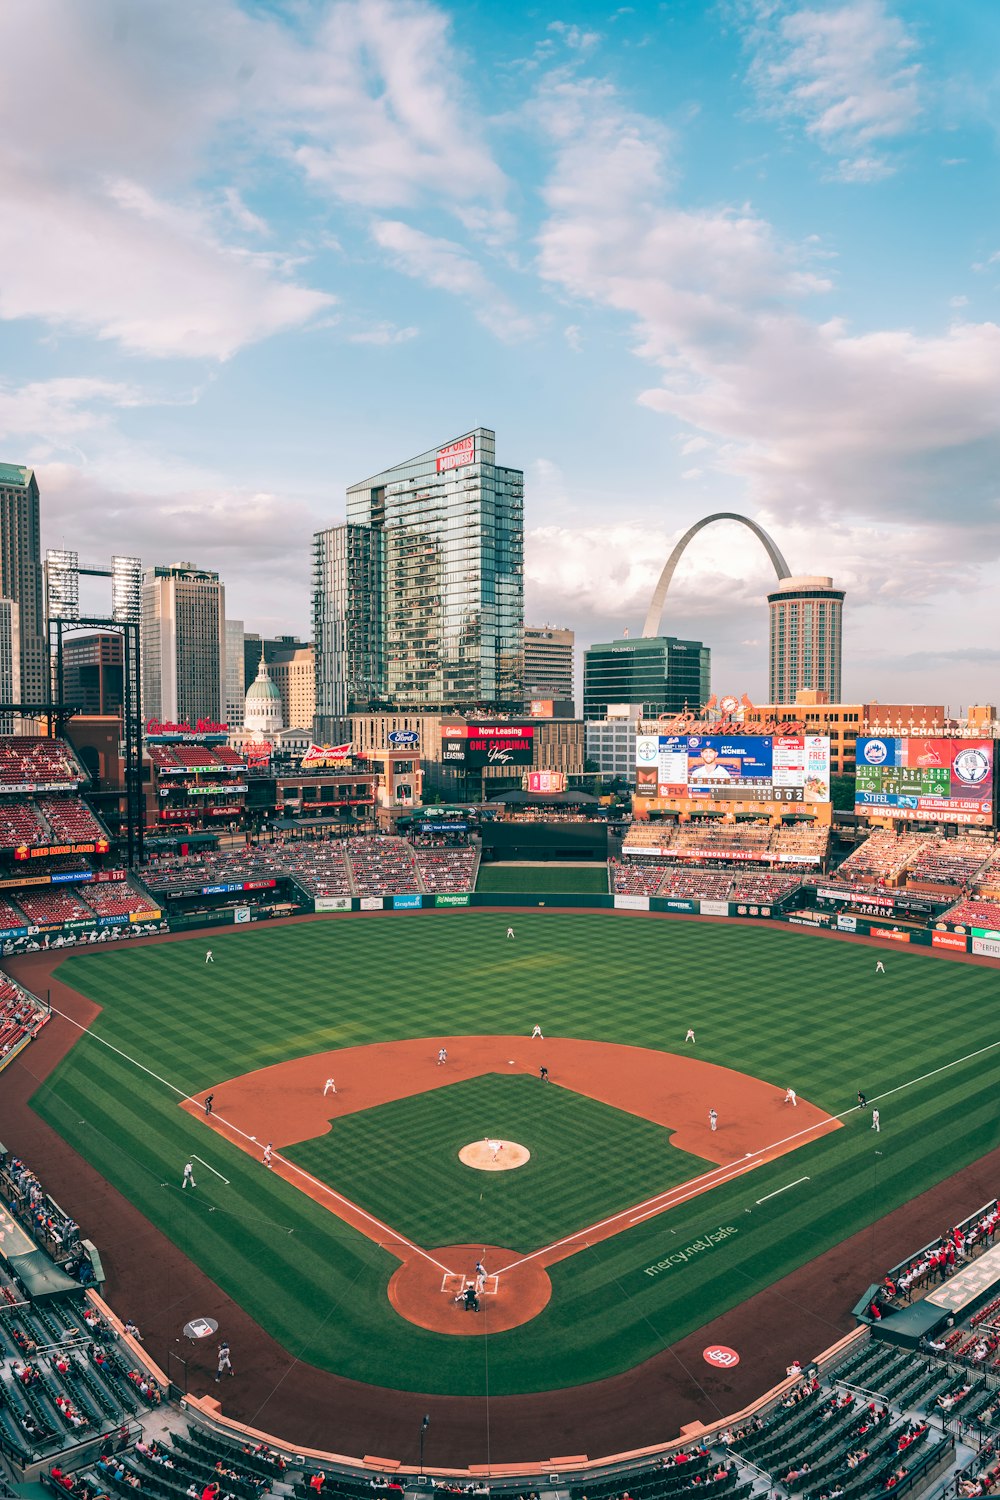 100+ Baseball Field Pictures [HD] | Download Free Images on Unsplash